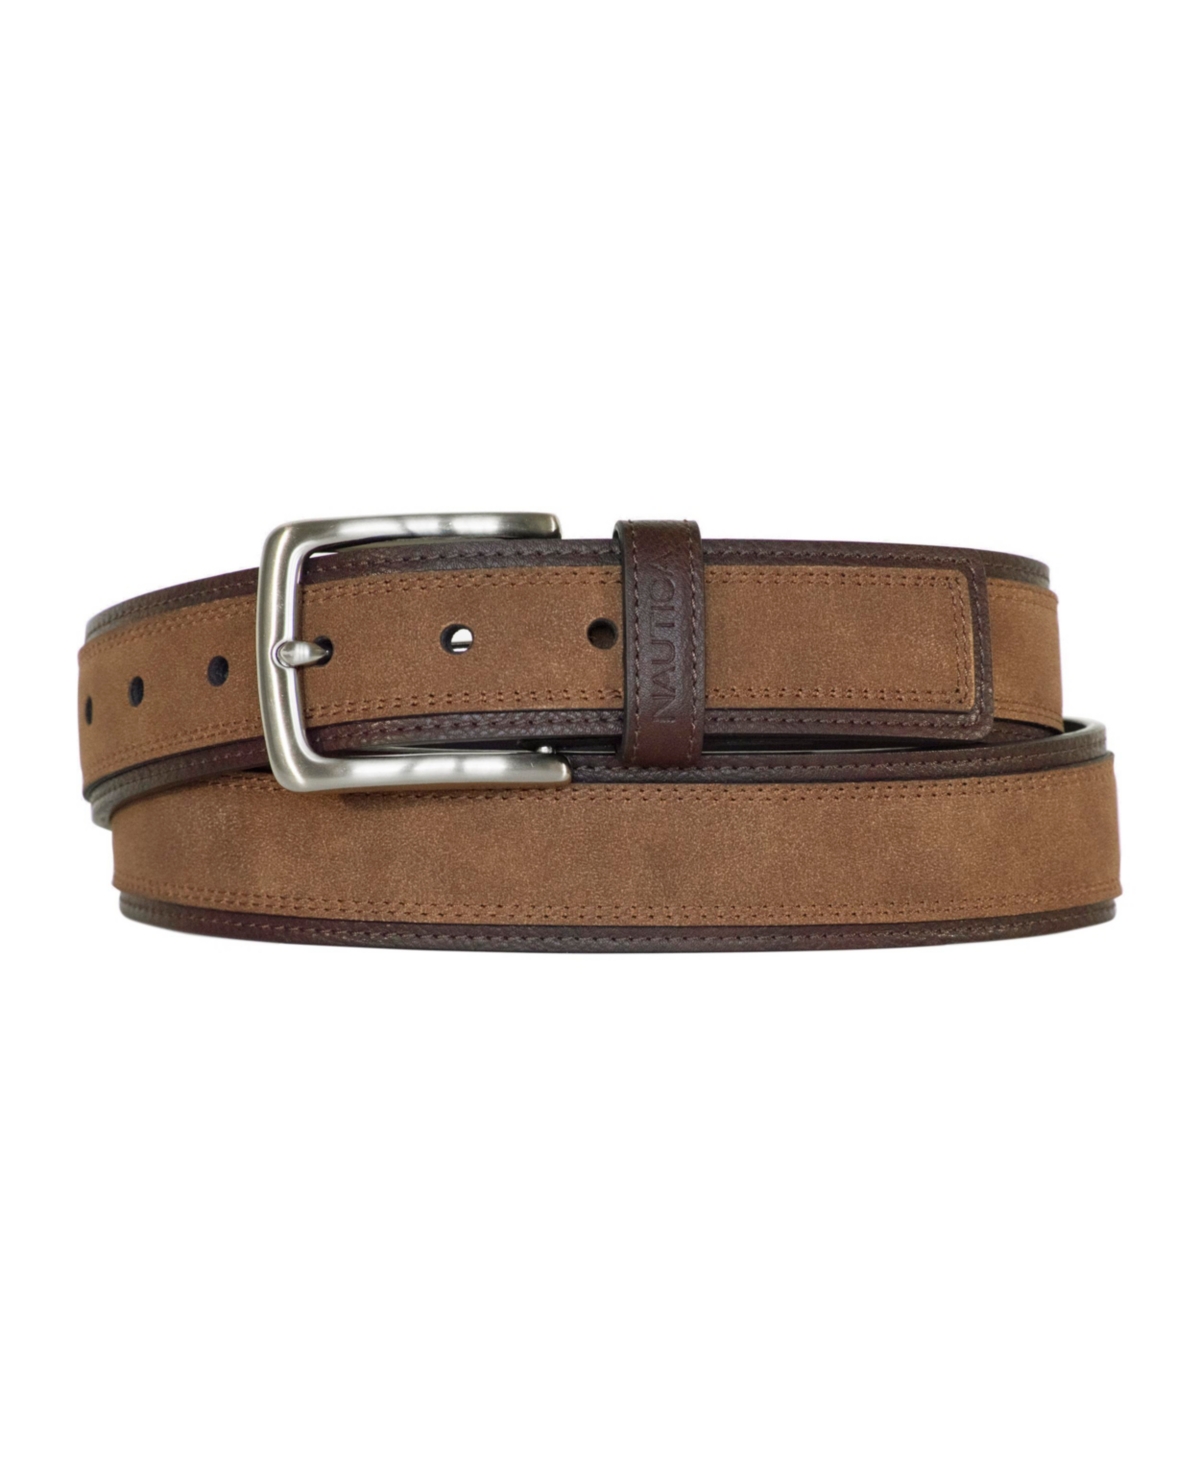 Nautica Men's Casual Leather Belt With Suede Overlay In Tan